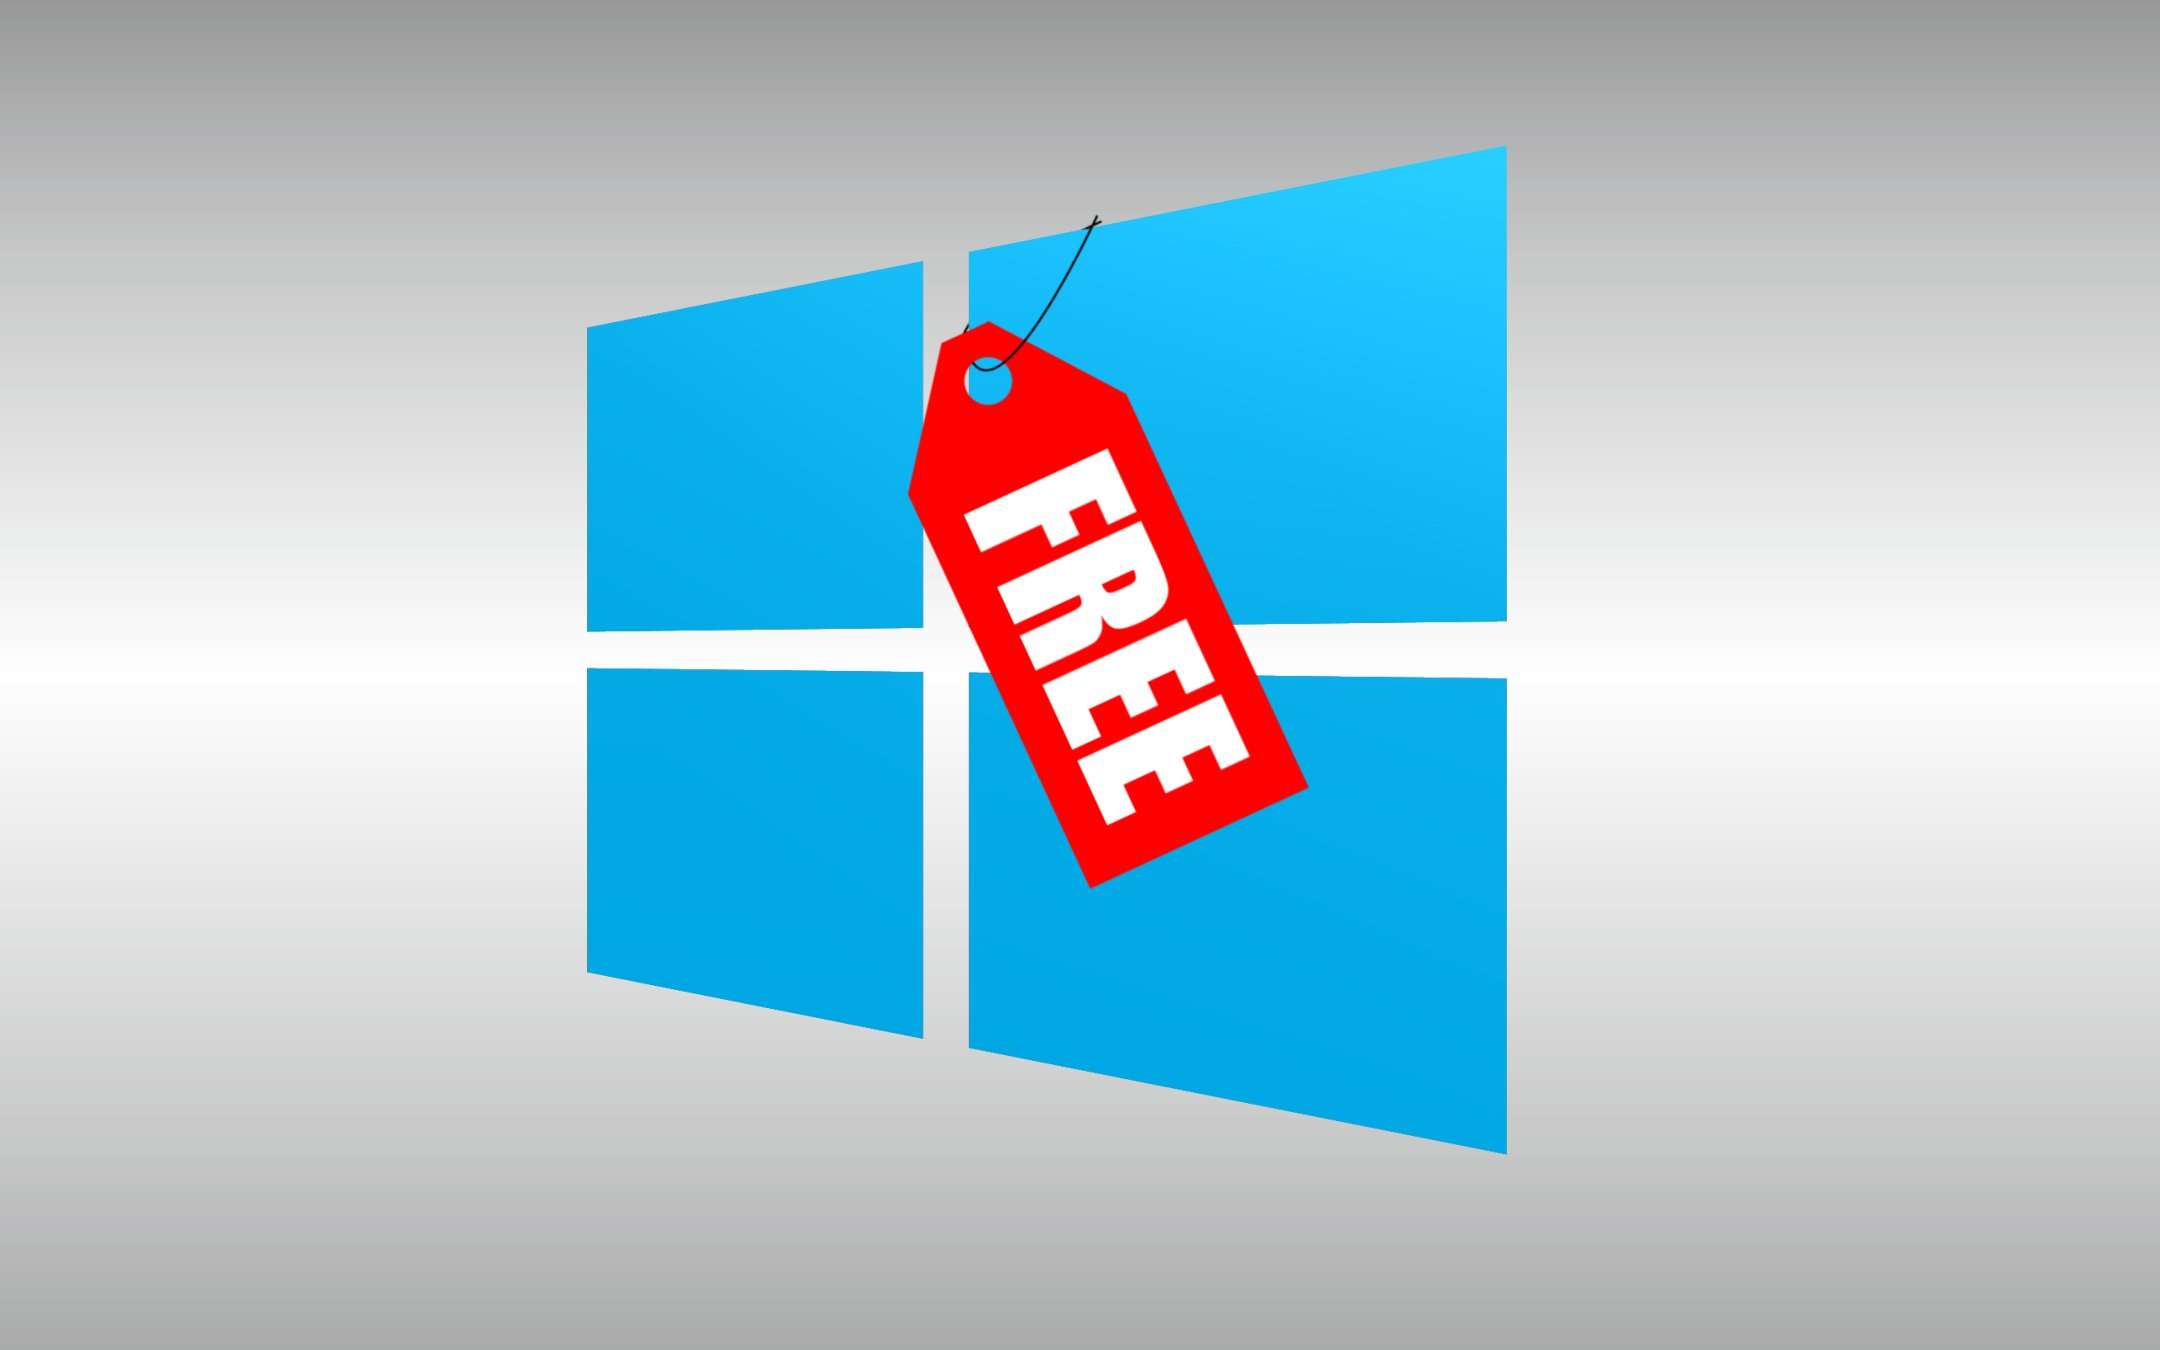 Black Friday GoDeal24: Windows 10 free if you buy Office